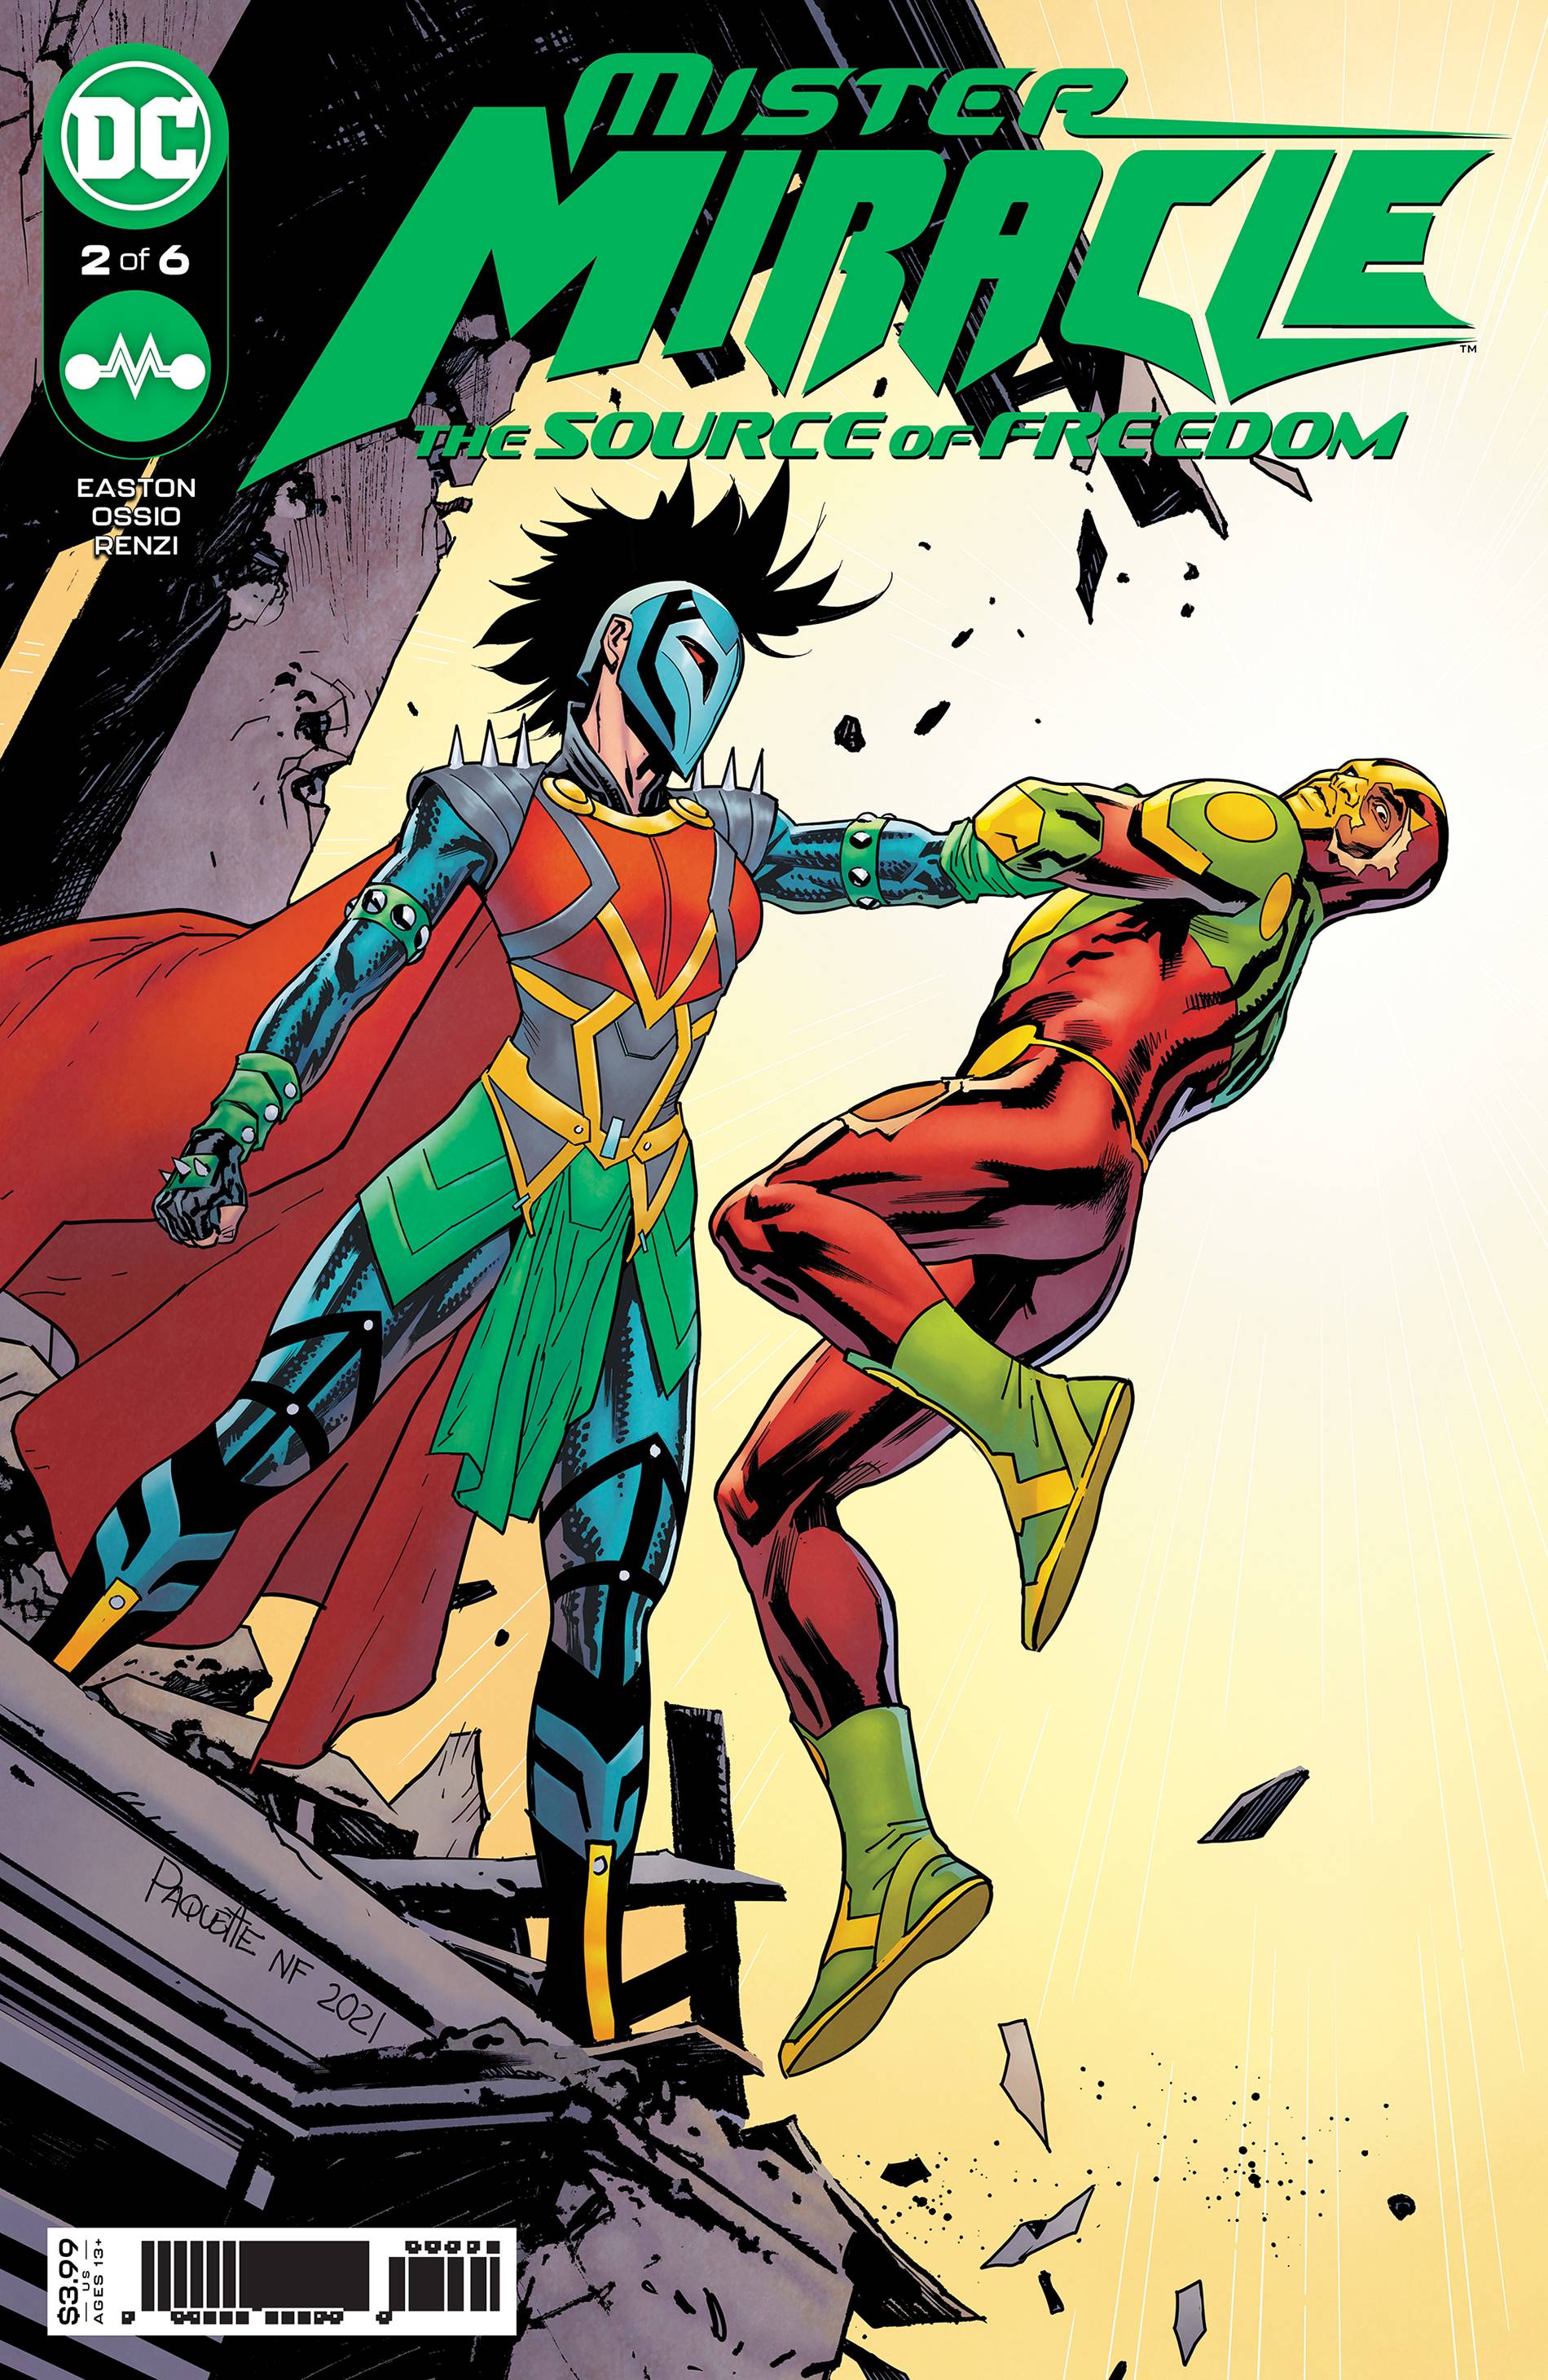 MISTER MIRACLE SOURCE OF FREEDOM #2 CVR A PAQUETTE